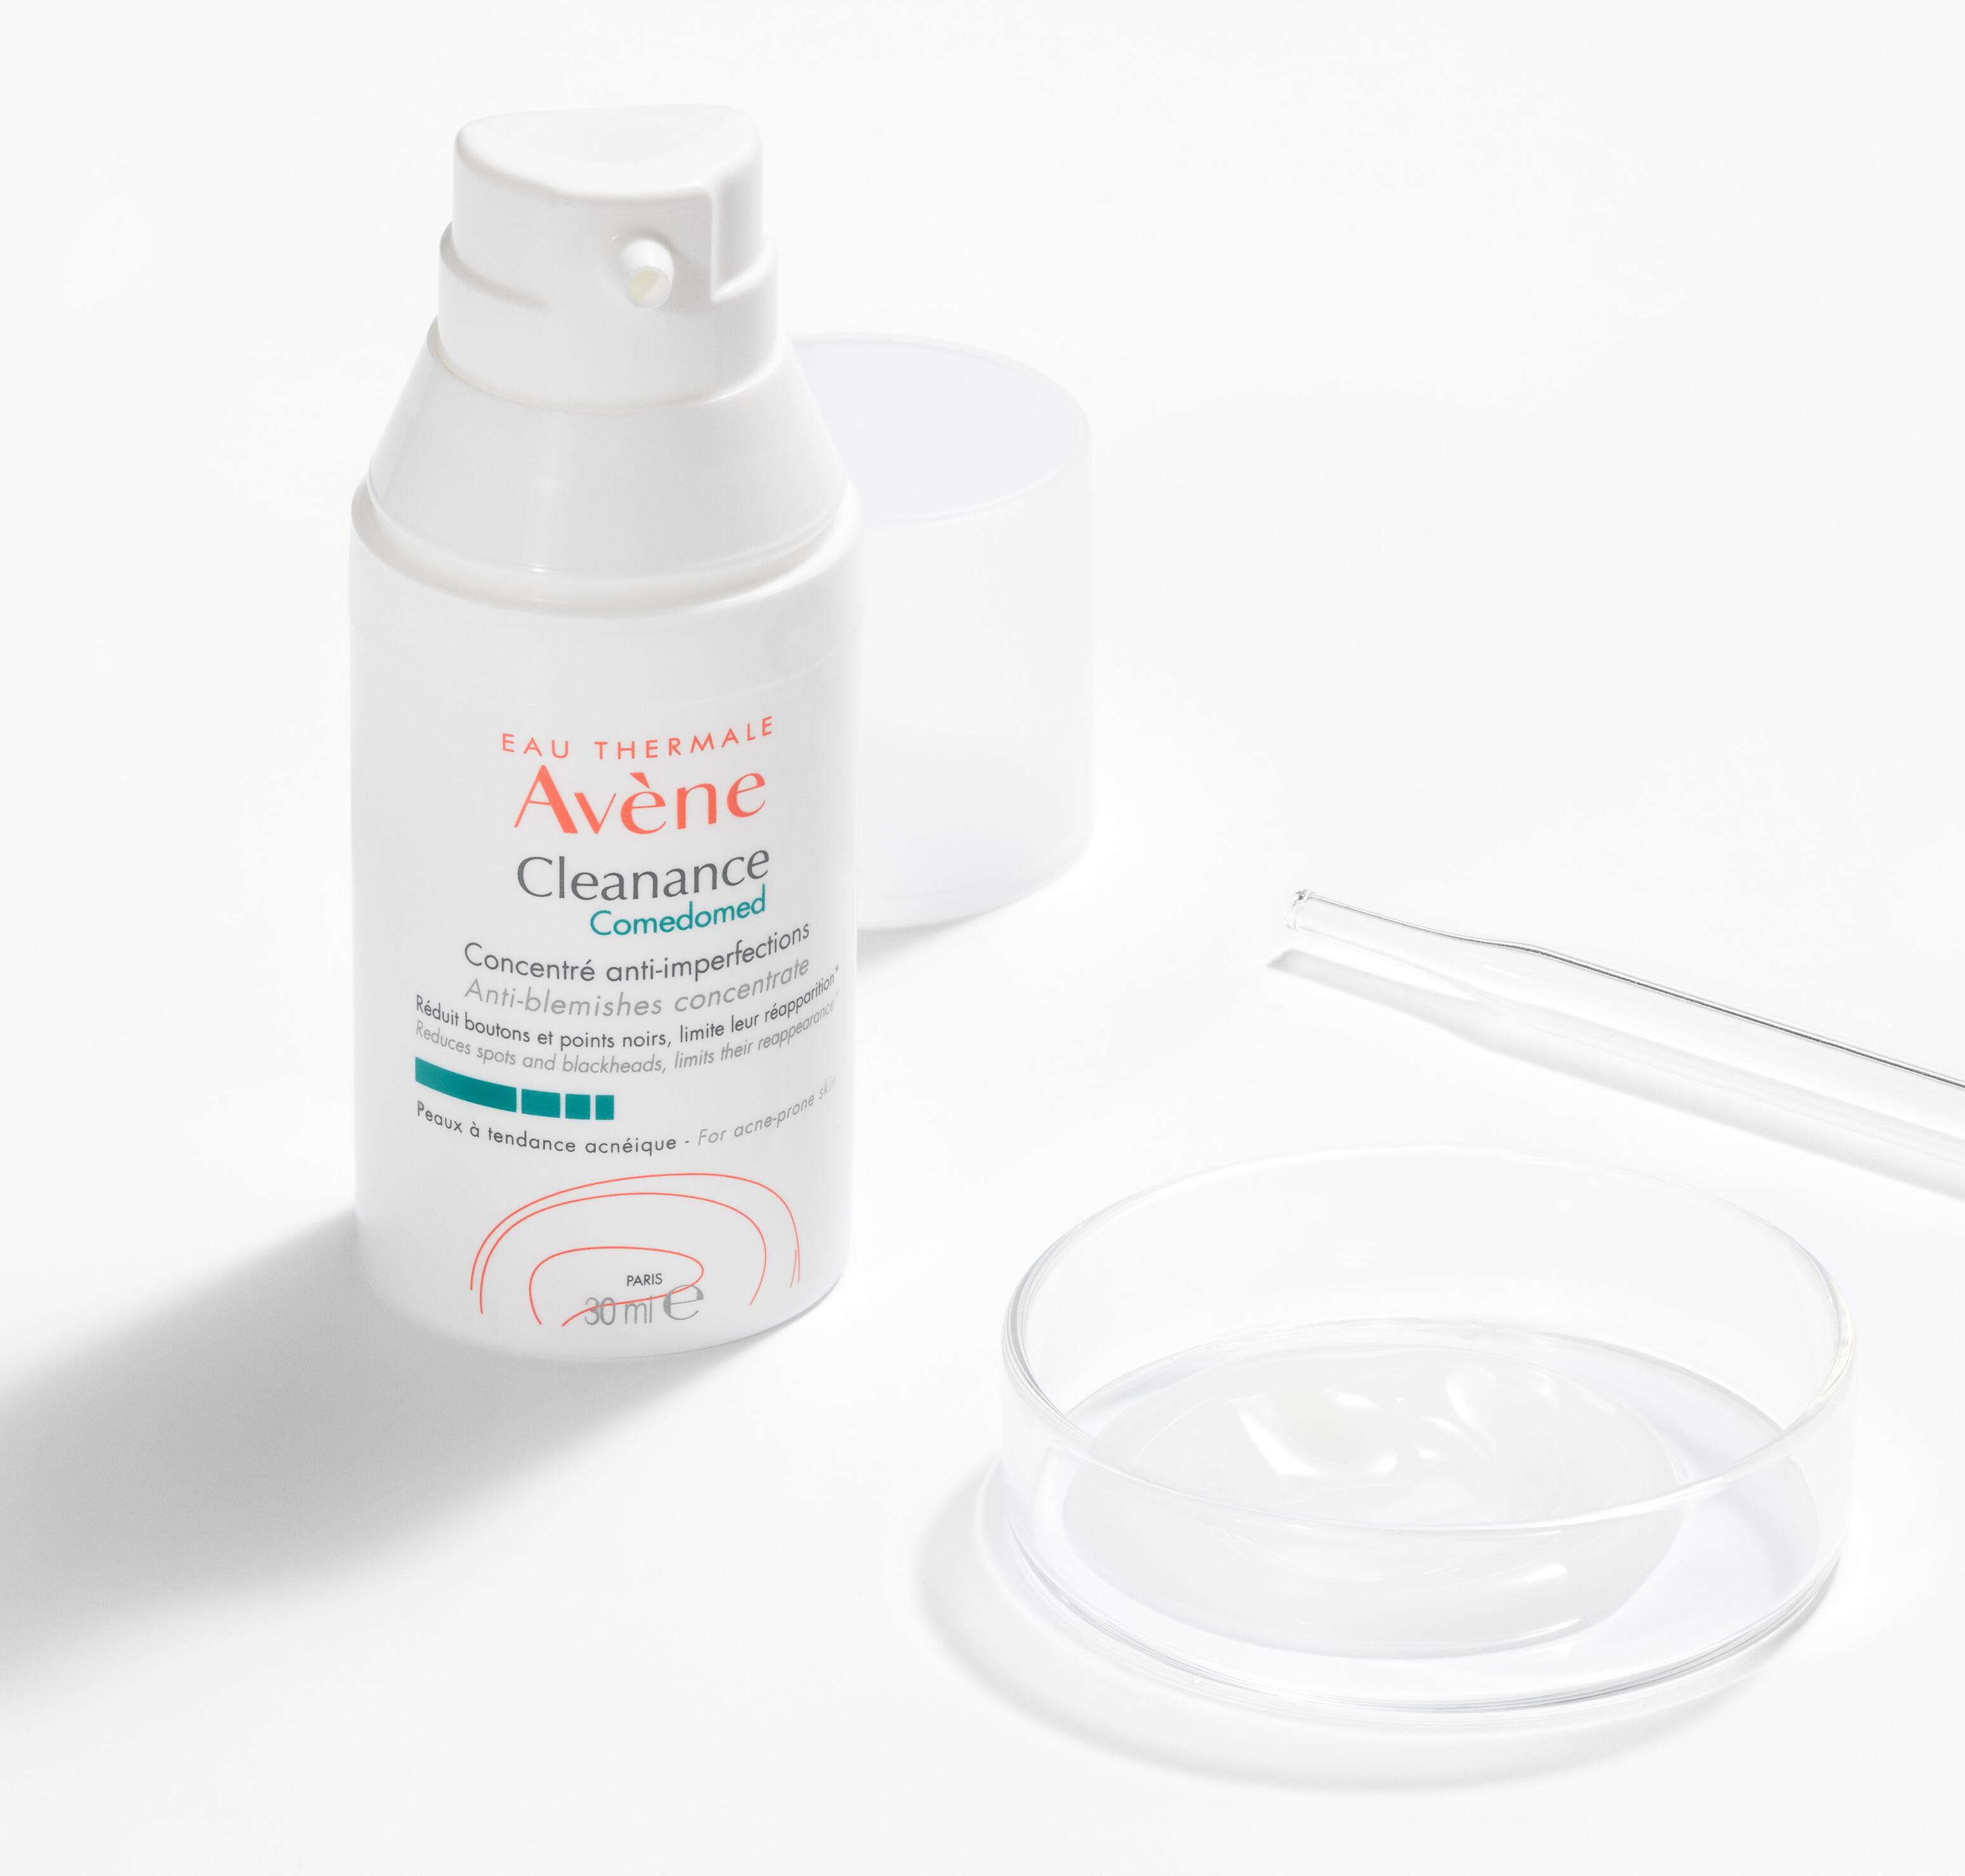 Cleanance: care for oily skin with a tendency to acne